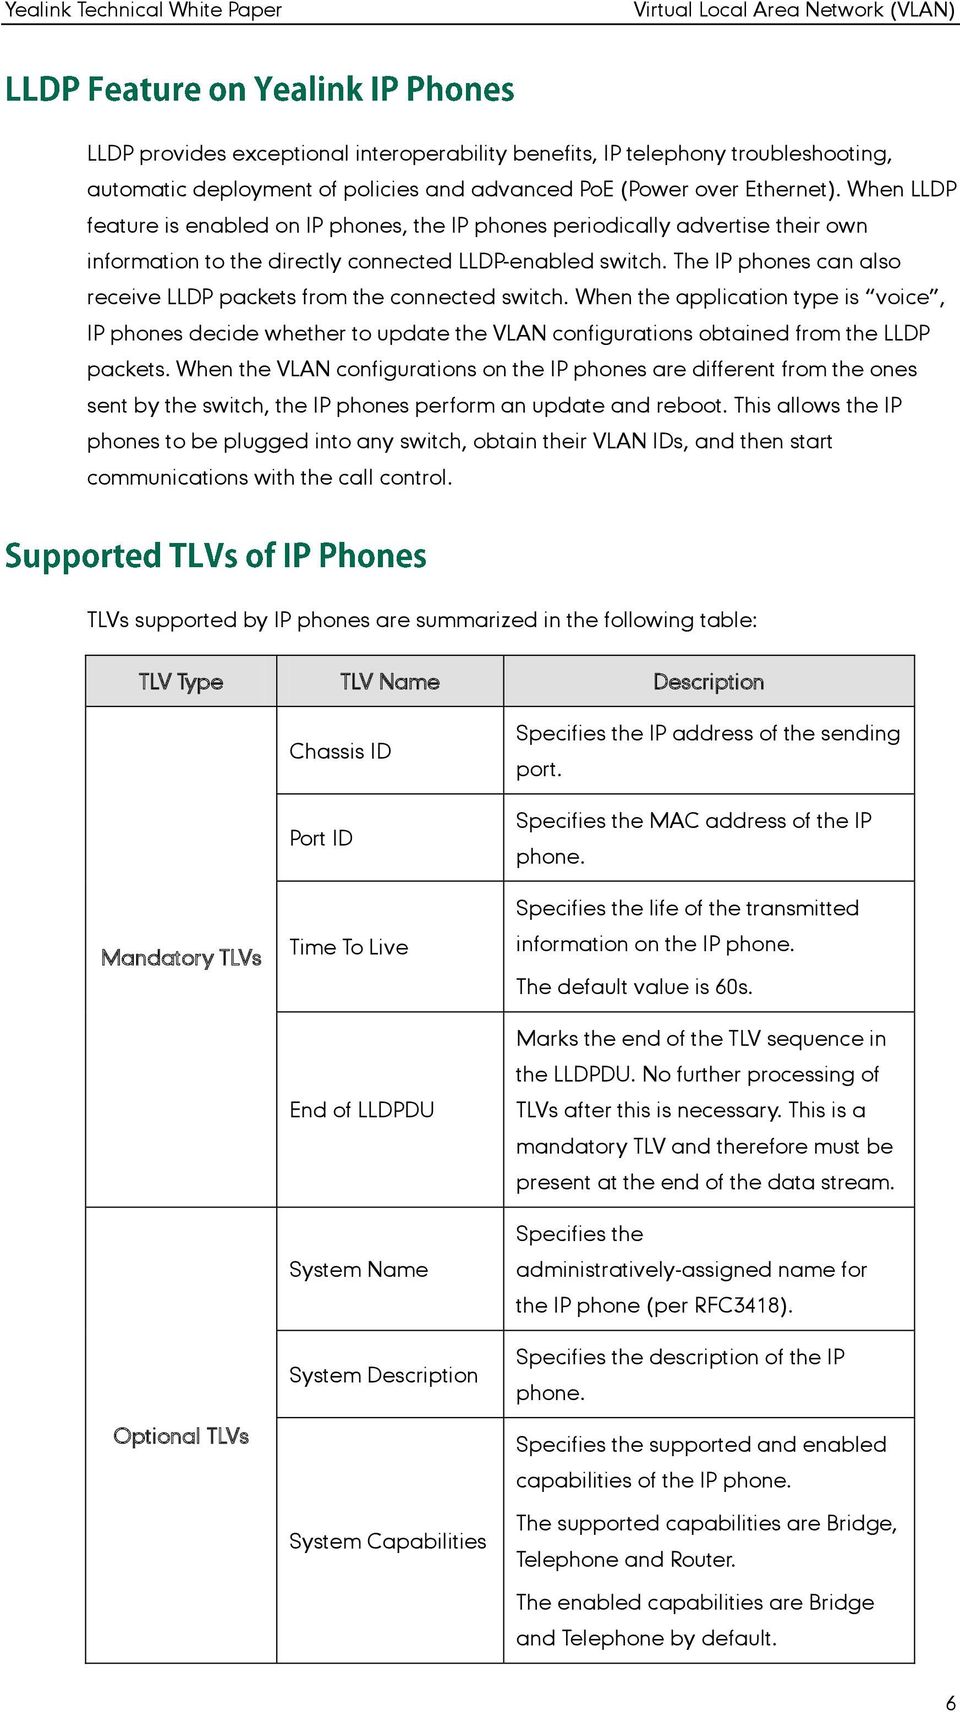 The IP phones can also receive LLDP packets from the connected switch. When the application type is voice, IP phones decide whether to update the VLAN configurations obtained from the LLDP packets.